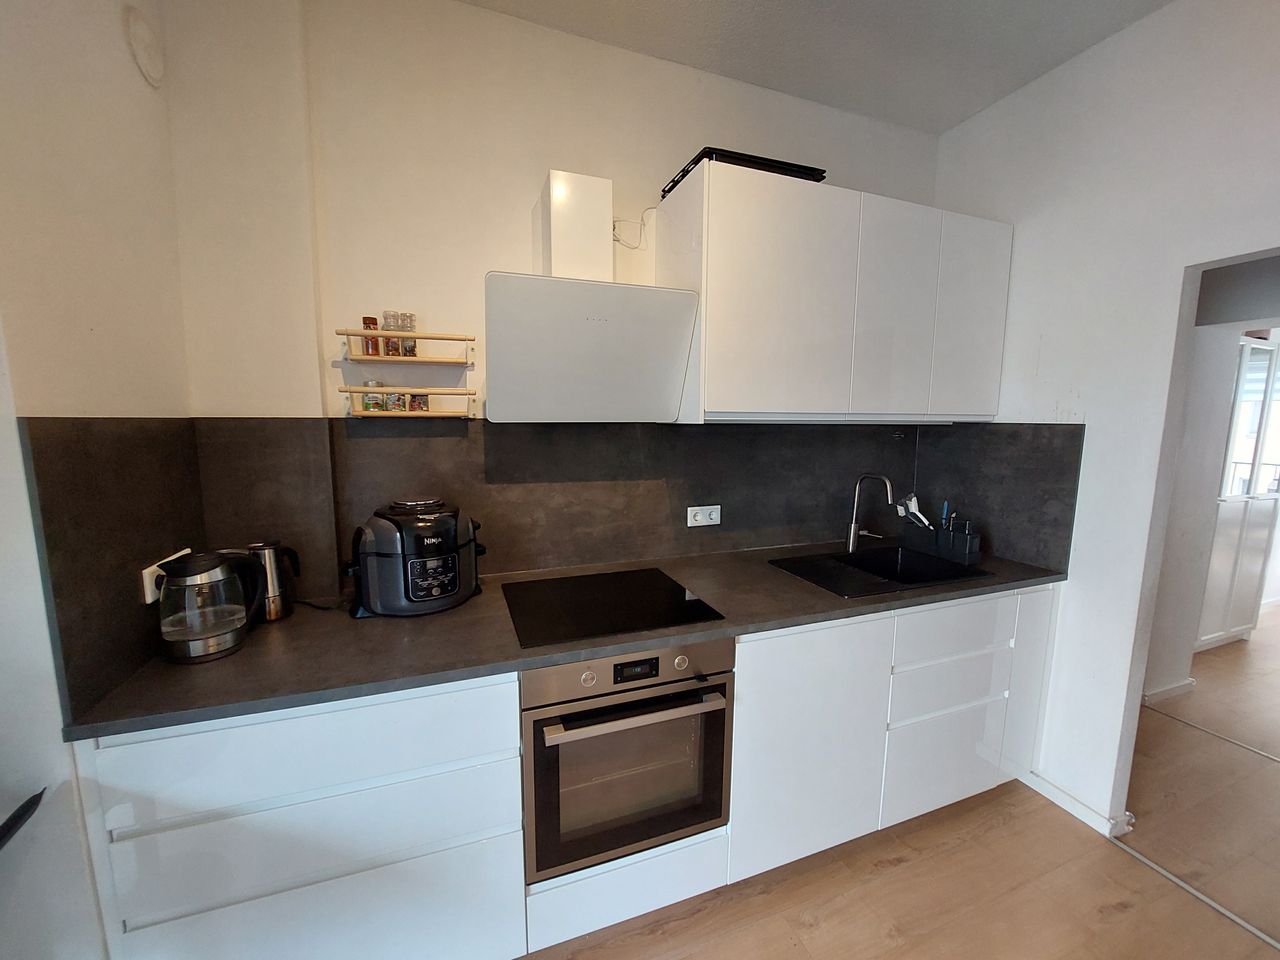 Stunning and fully furnished apartment in the heart of Düsseldorf